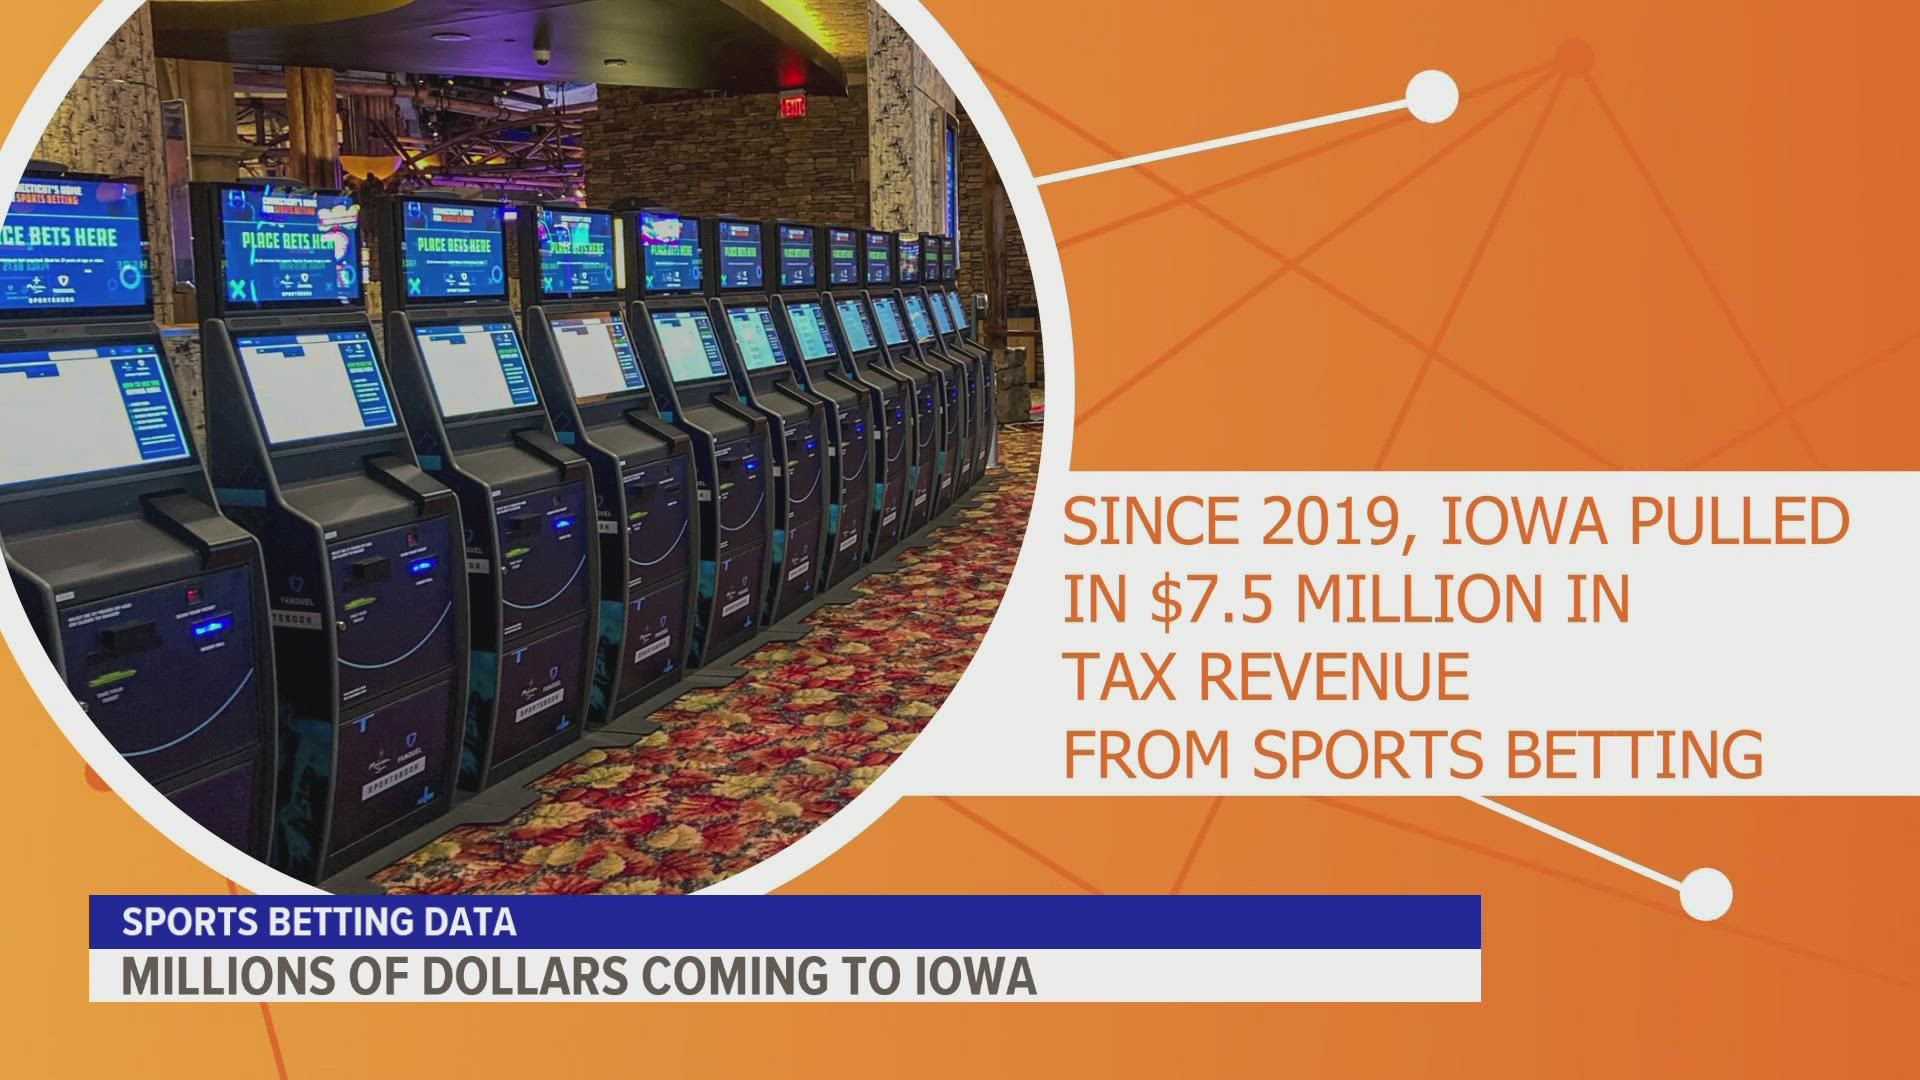 In the first two years since sports betting was legalized in Iowa, the state brought in nearly $8 million in tax revenue.